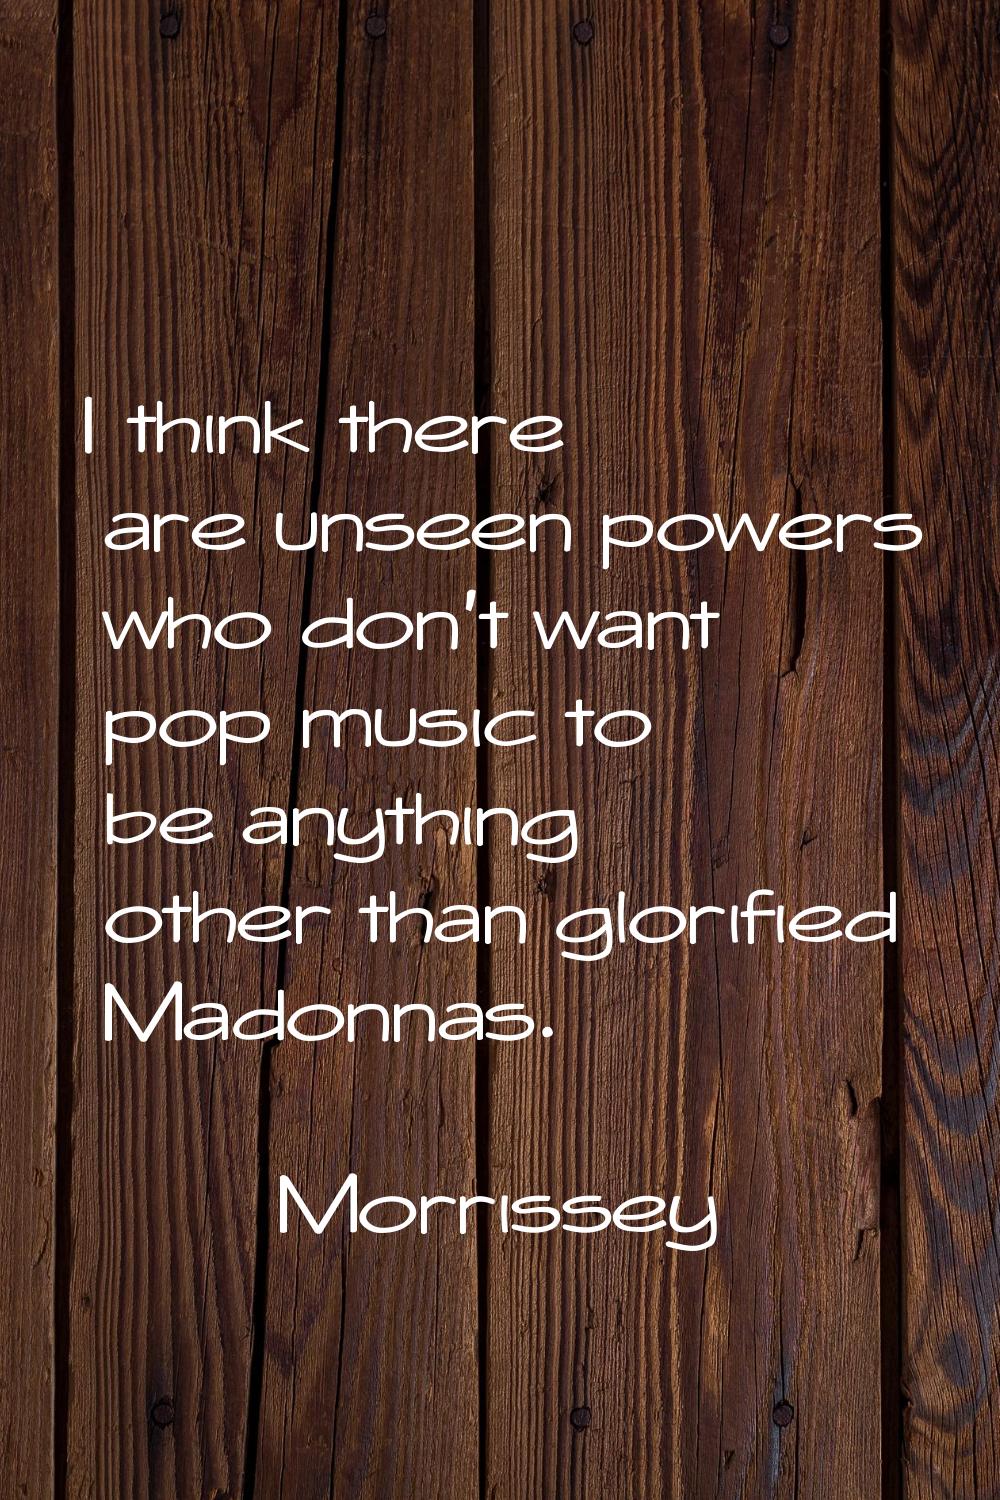 I think there are unseen powers who don't want pop music to be anything other than glorified Madonn